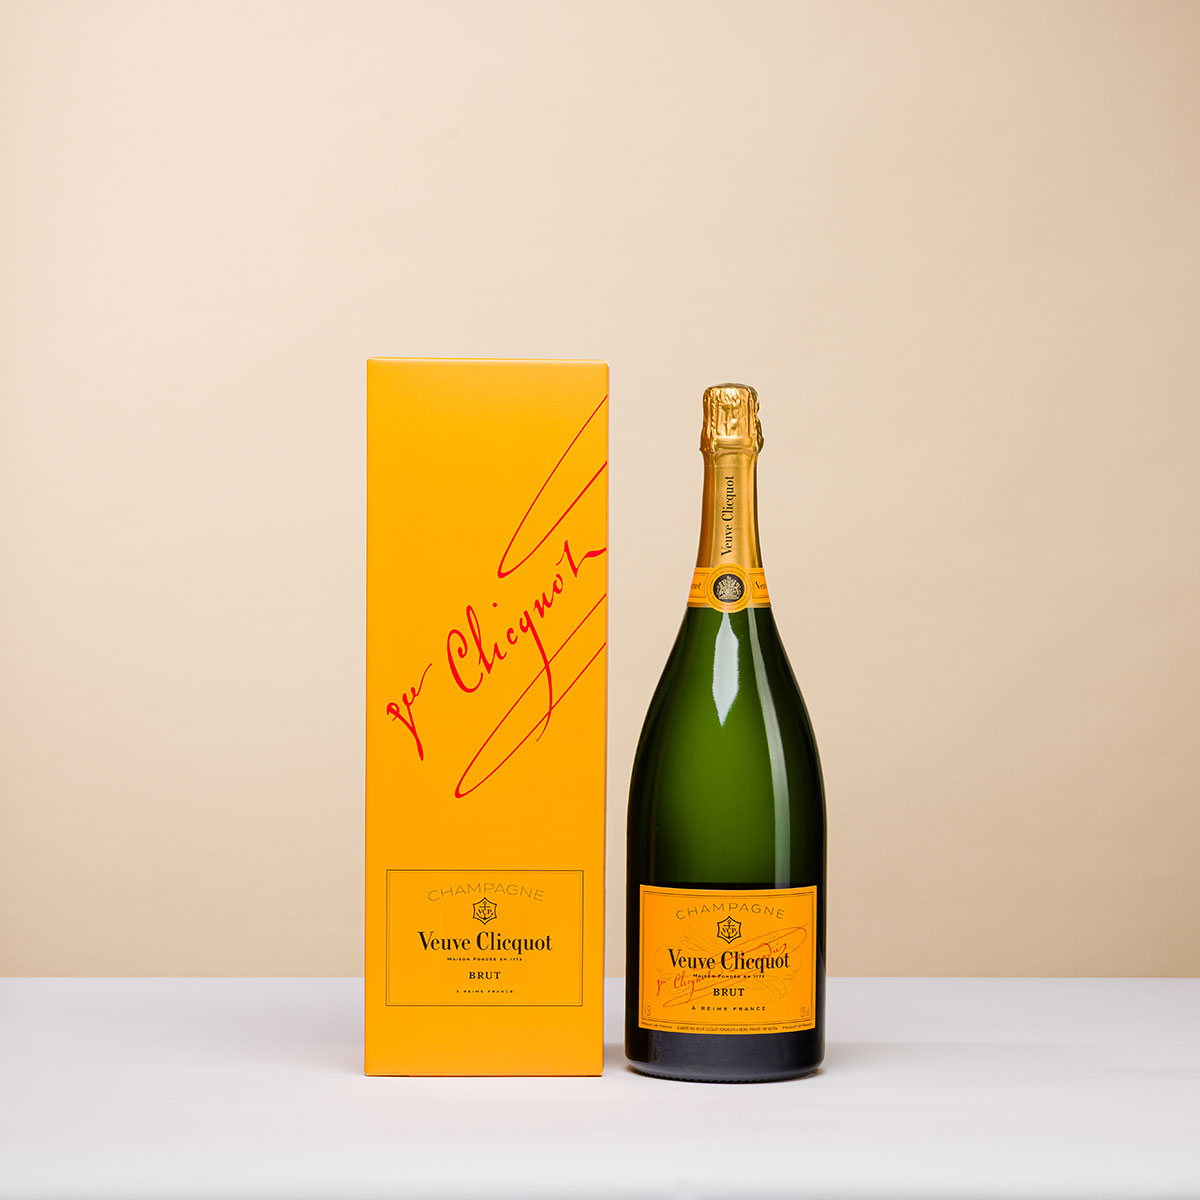 Veuve Clicquot Yellow Label in Magnum Box in Germany cl GiftsForEurope Bottle by Gift 150 Delivery 